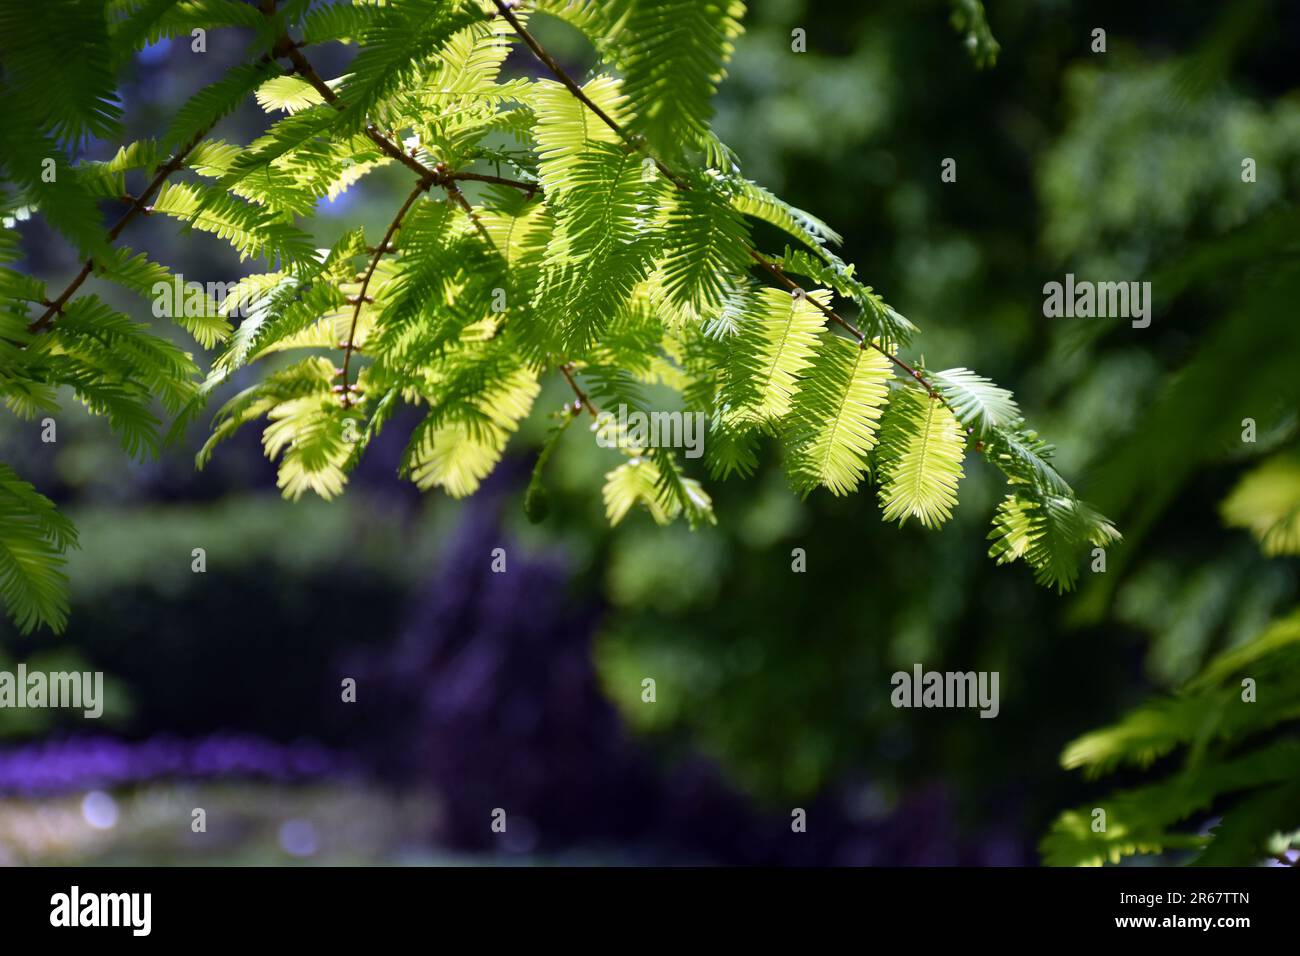 Closeup of the Dawn redwood also known as Metasequoia glyptostroboides Gold Rush, a deciduous conifer native to central and western China. Stock Photo